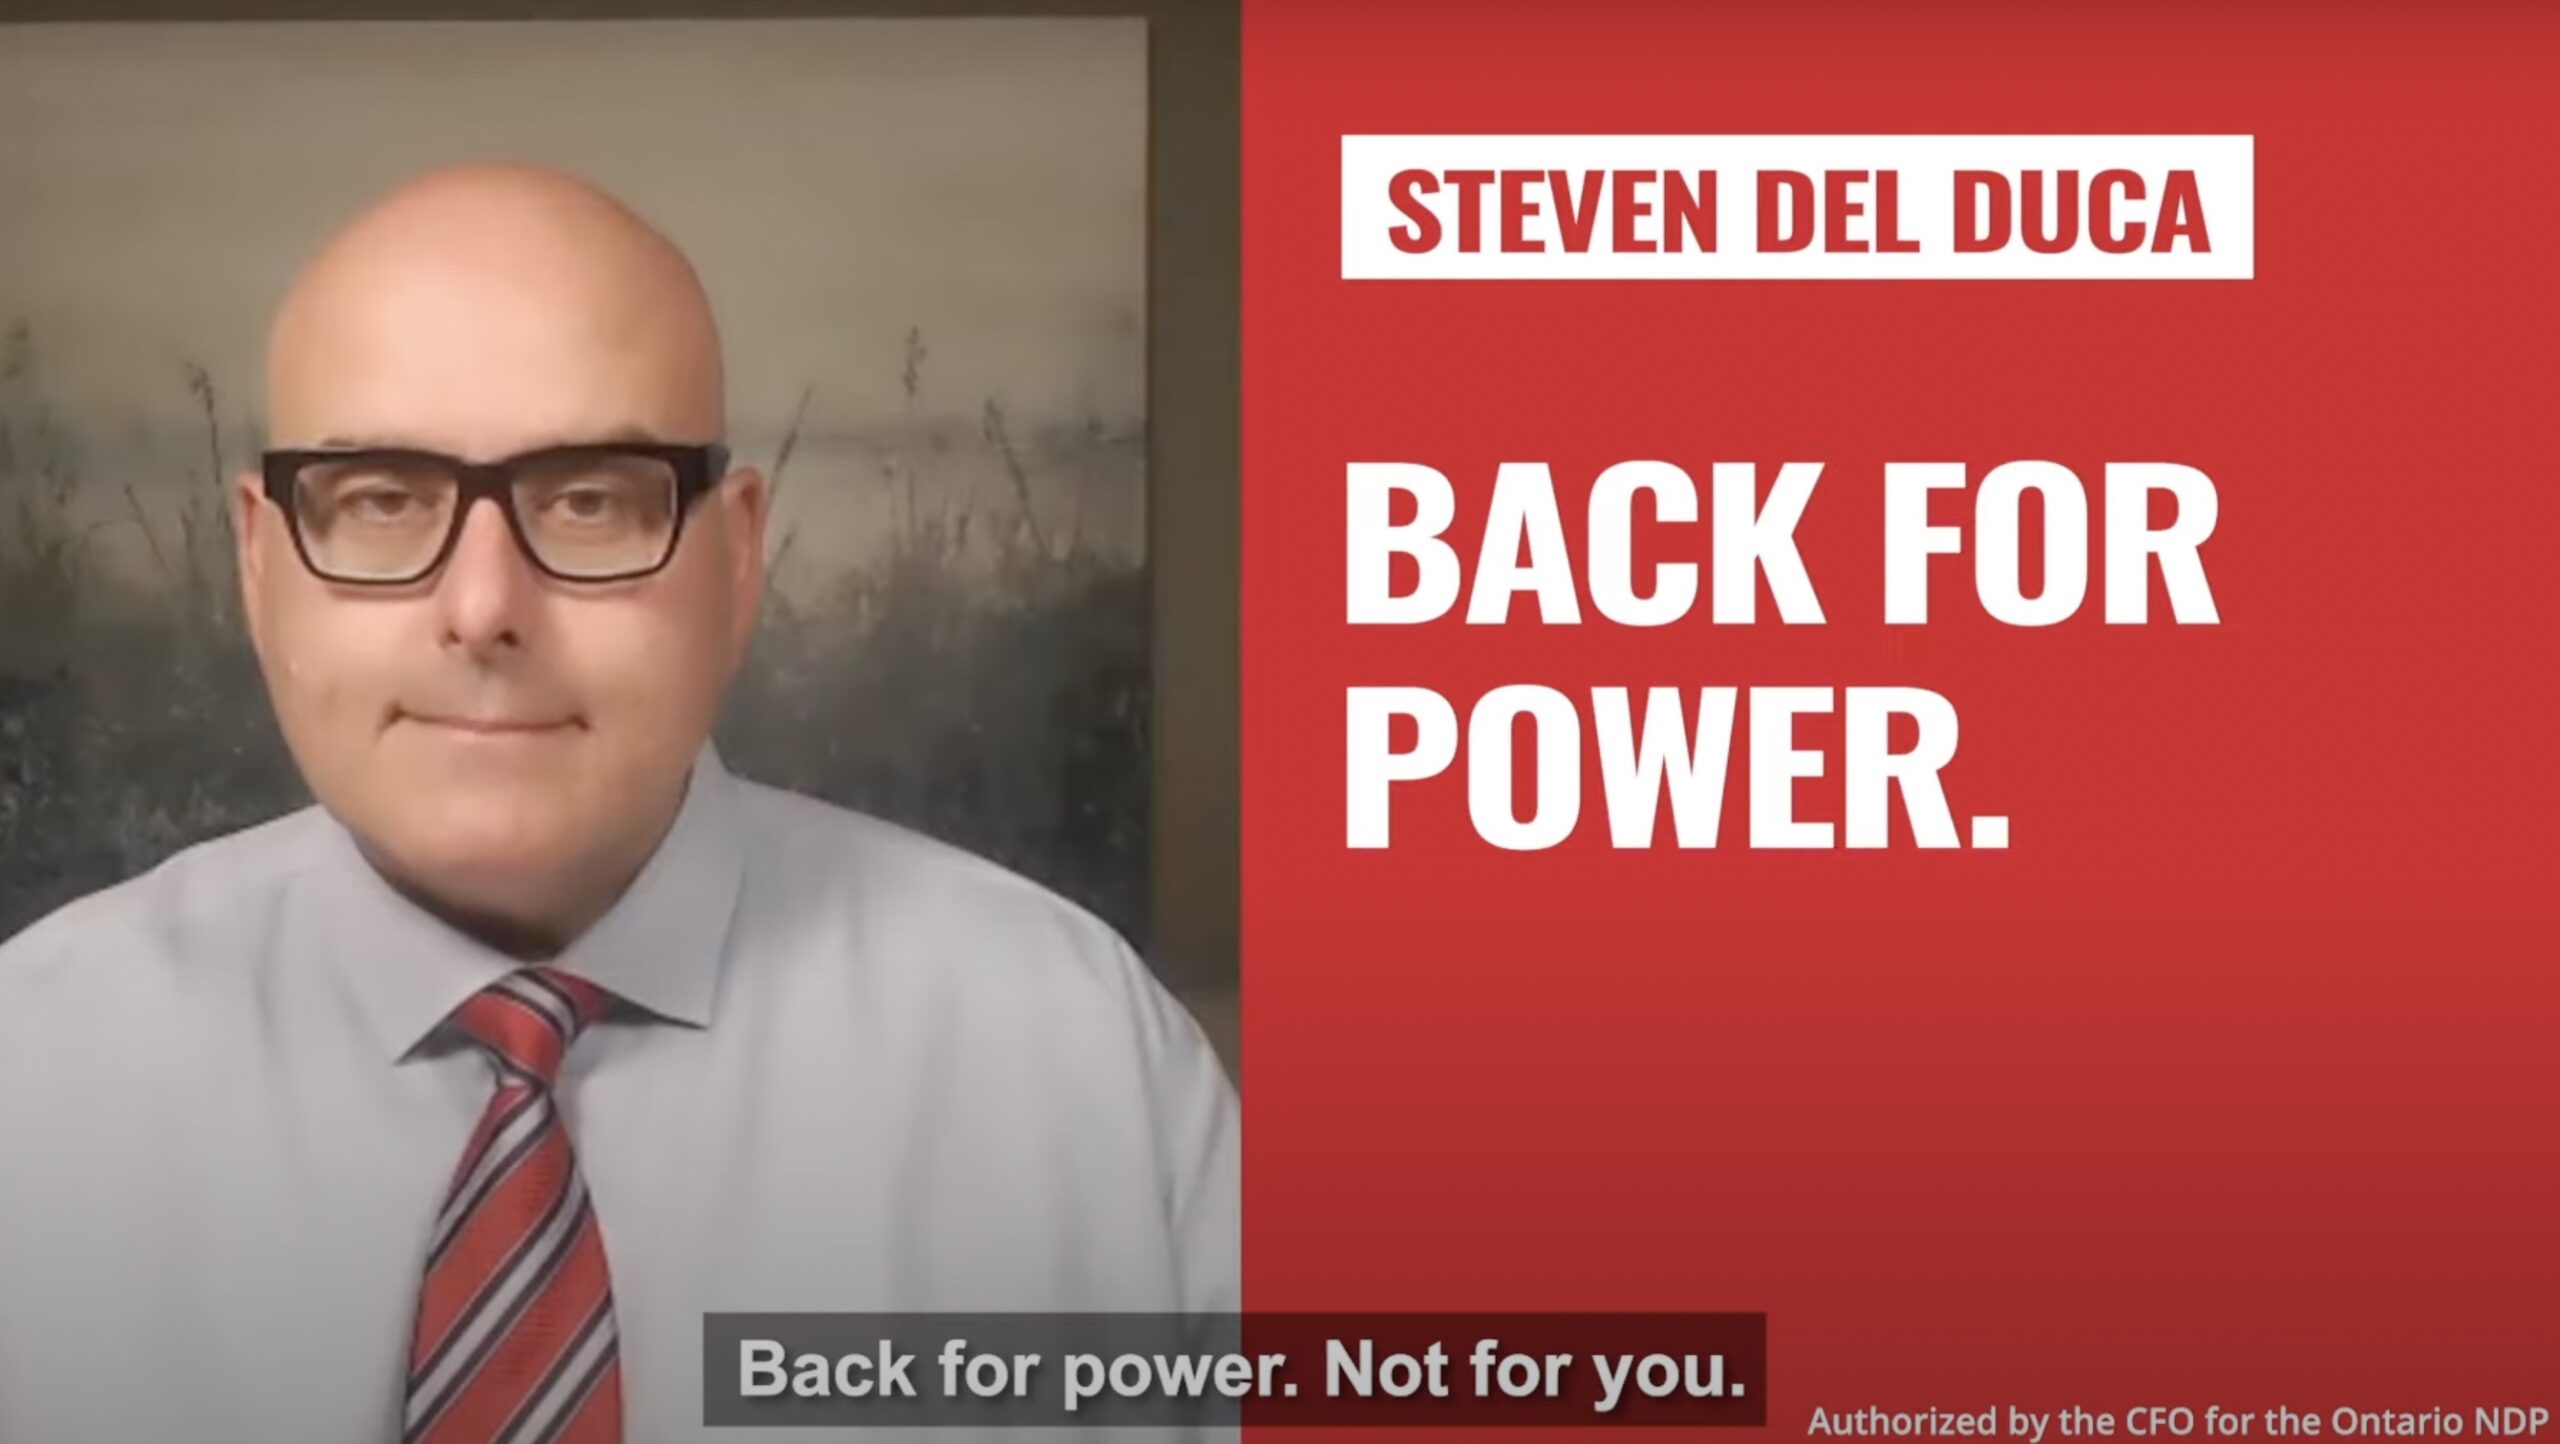 Ontario NDP releases attack ad defining Liberal leader as 'back for power, not for you'